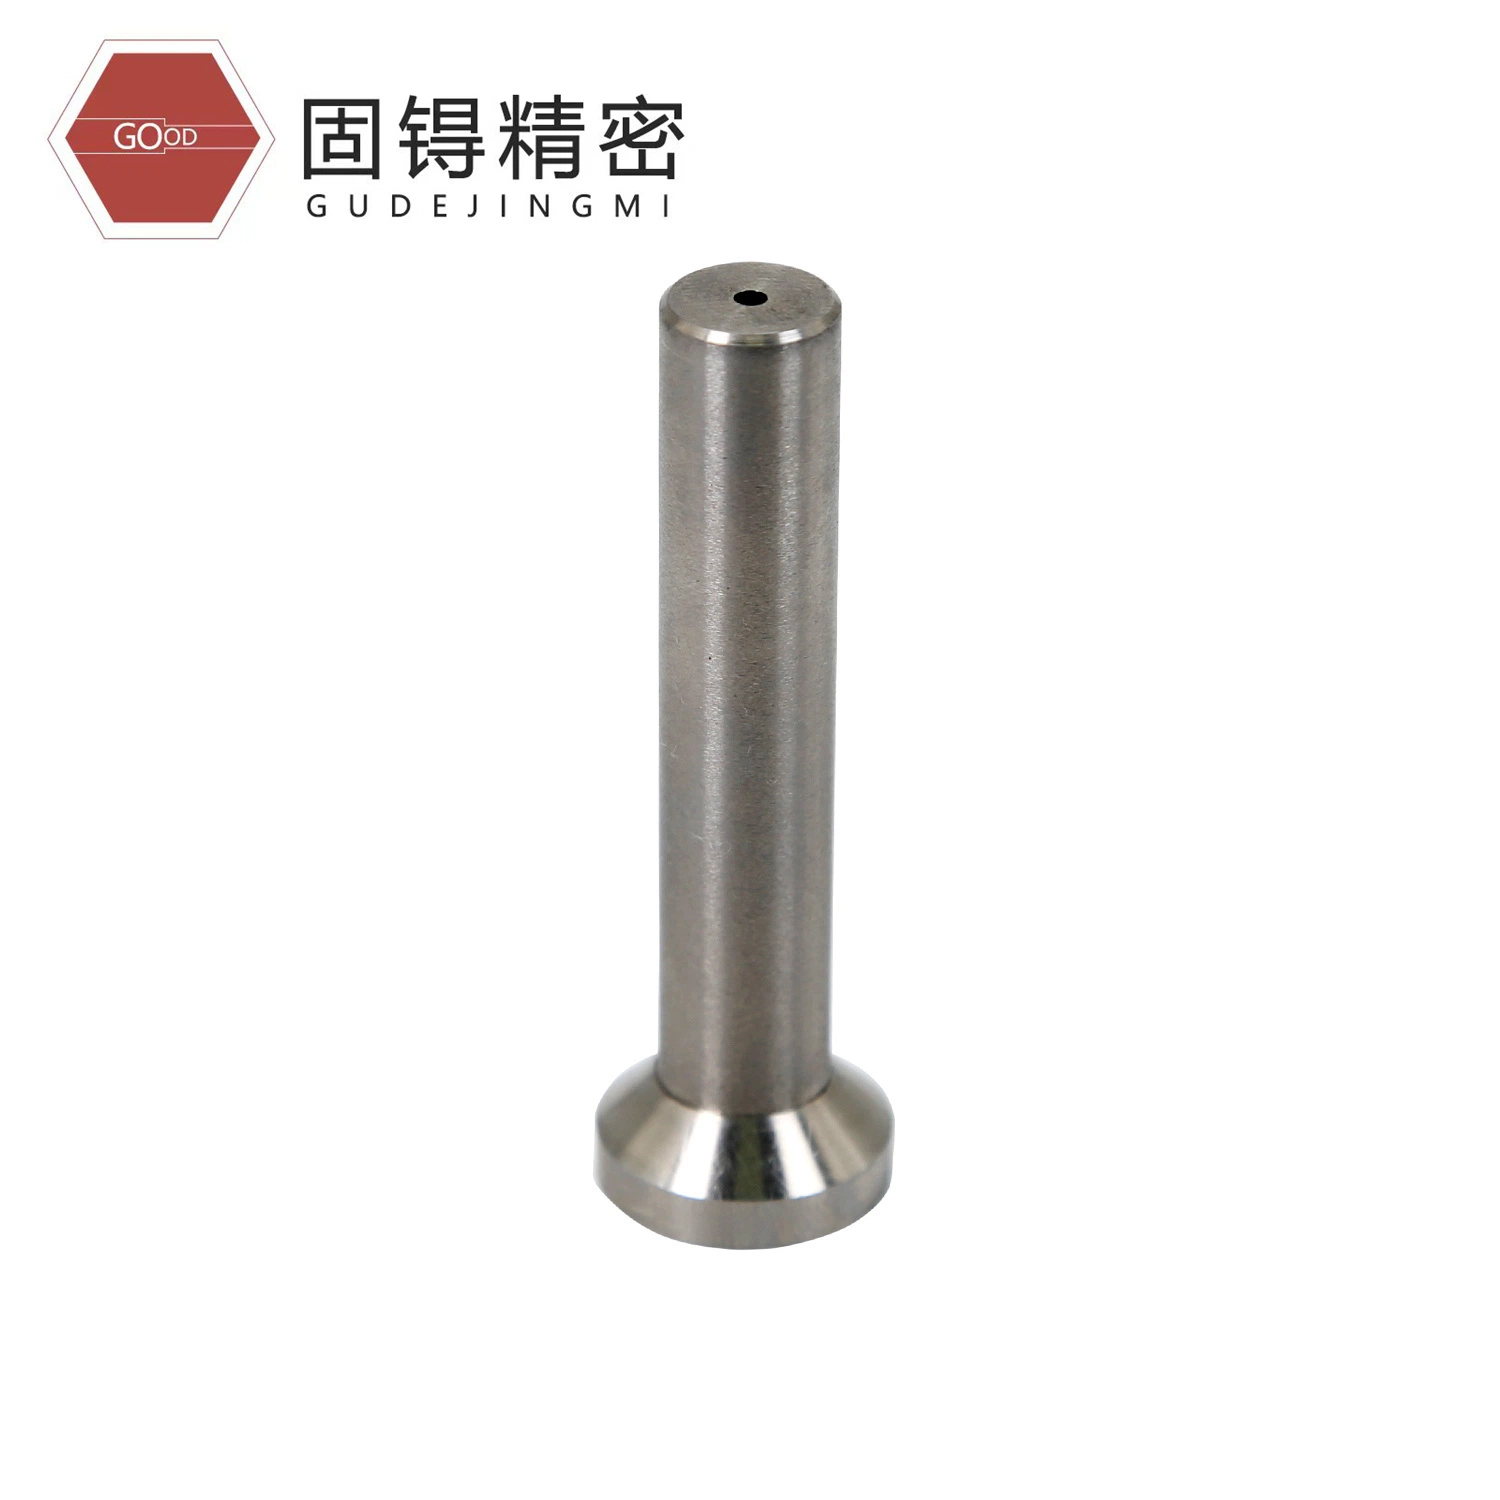 China Prototype Non-Standard CNC Milling Turning Precision Machining 7075 Aluminum Anodized Other Bicycle Auto Motorcycle Part